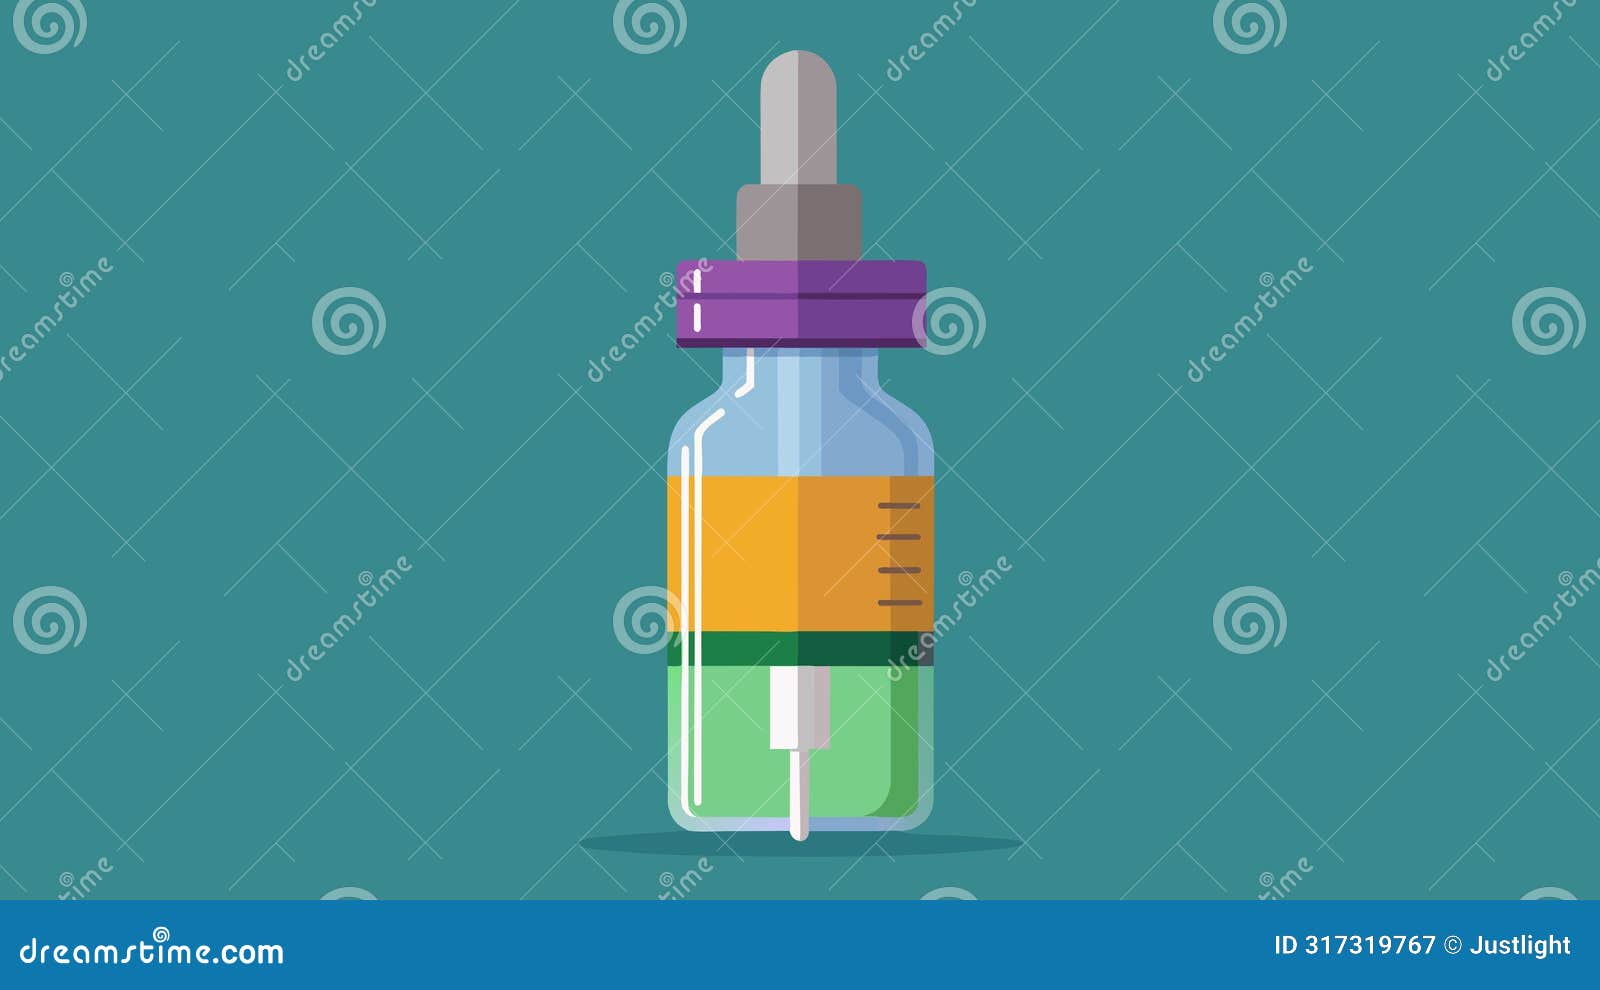 a dropper bottle with clearly marked dosage indicators allowing for precise and gradual dosing of ketamine for patients